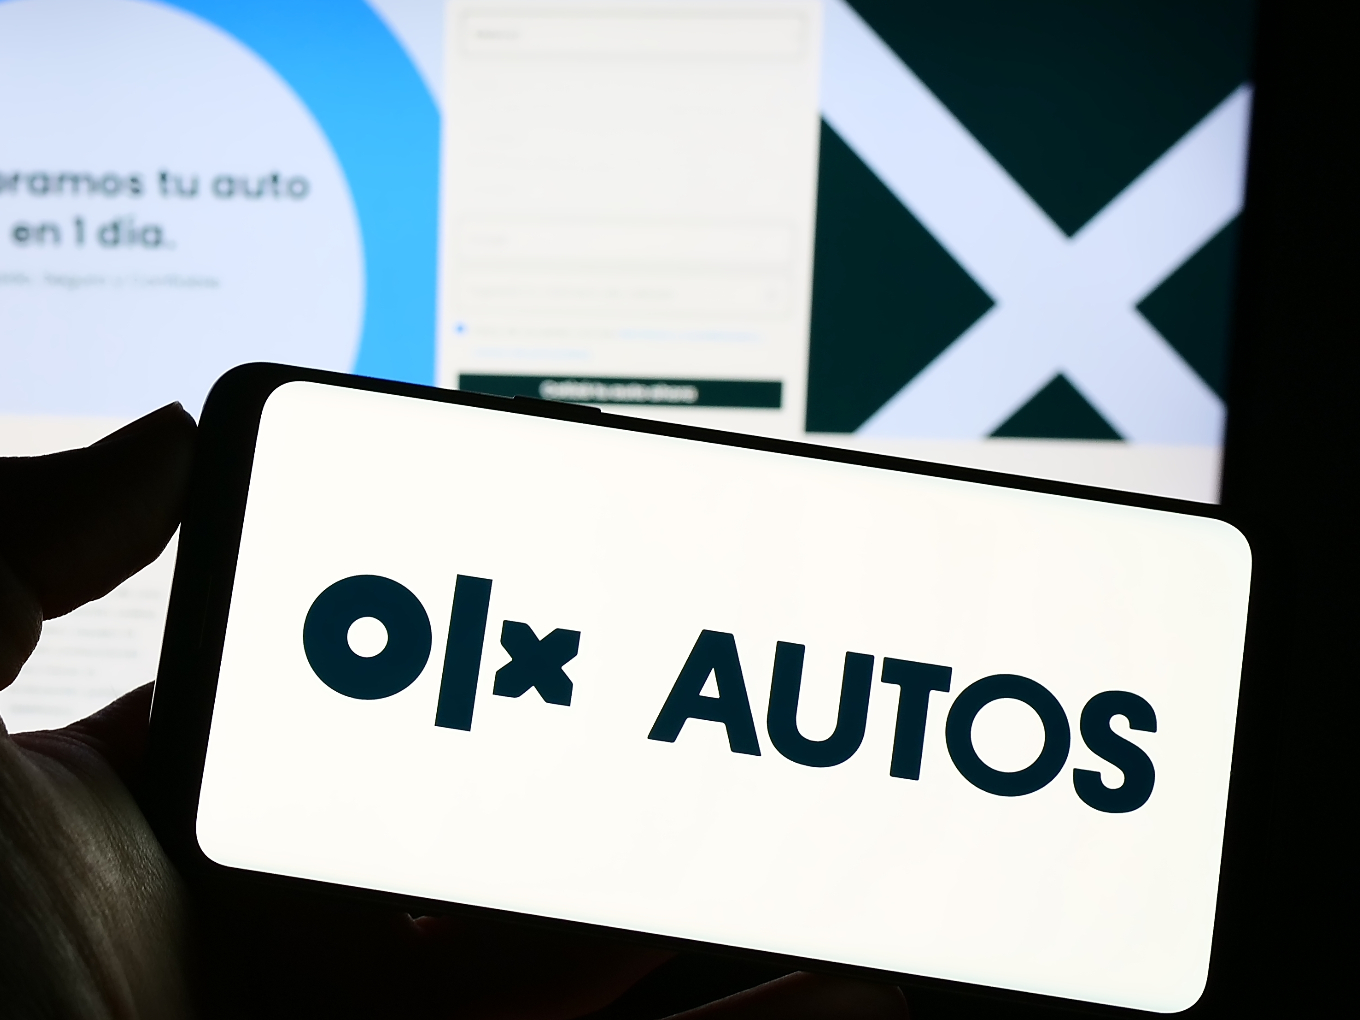 Prosus in talks to sell Olx Autos business in India, other markets